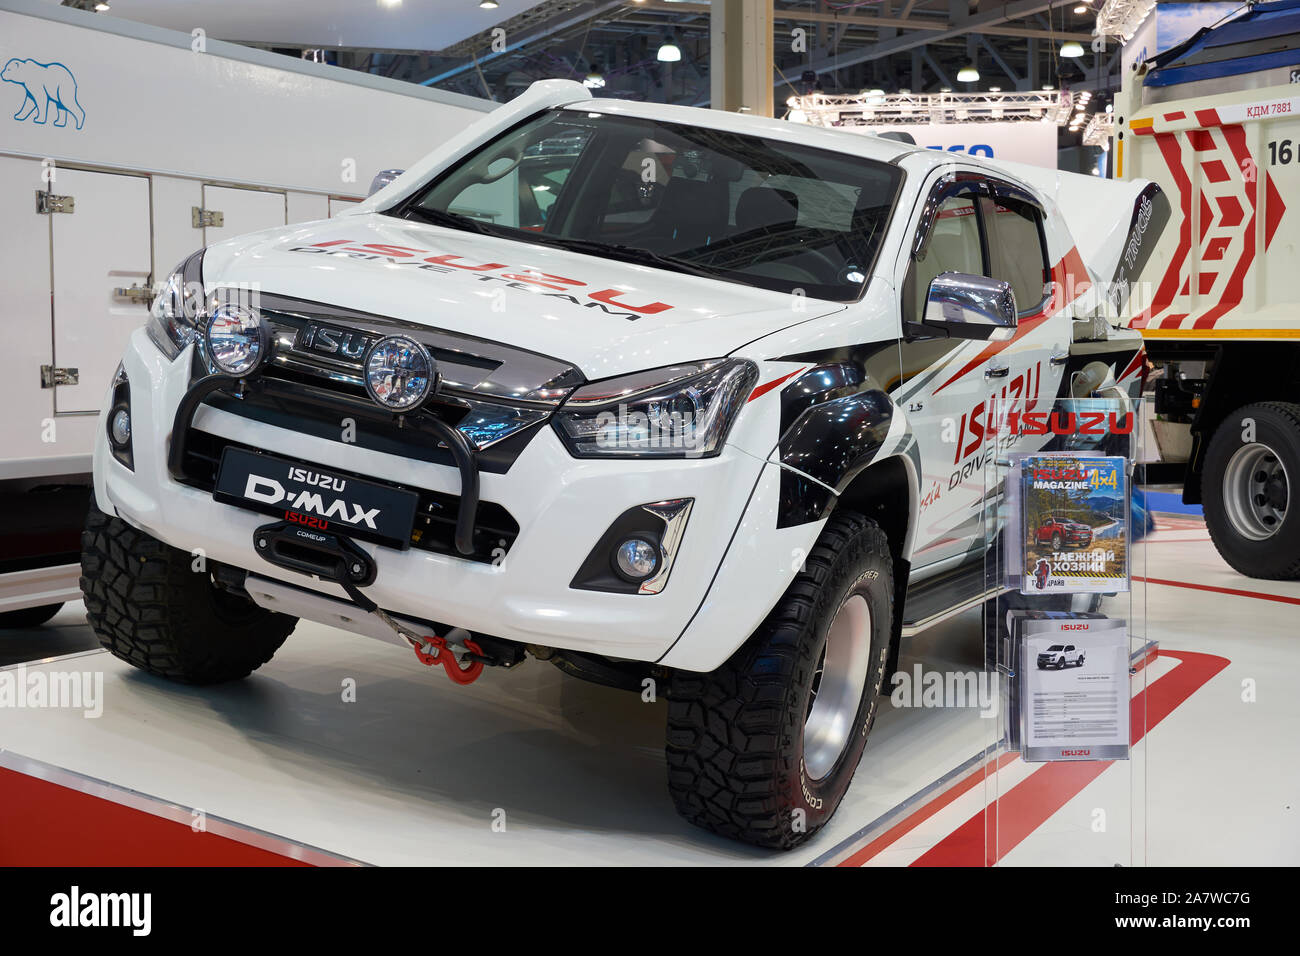 Moscow, Russia - September 05, 2019: International commercial vehicle auto show. Isuzu D-Max arctic truck. Stock Photo